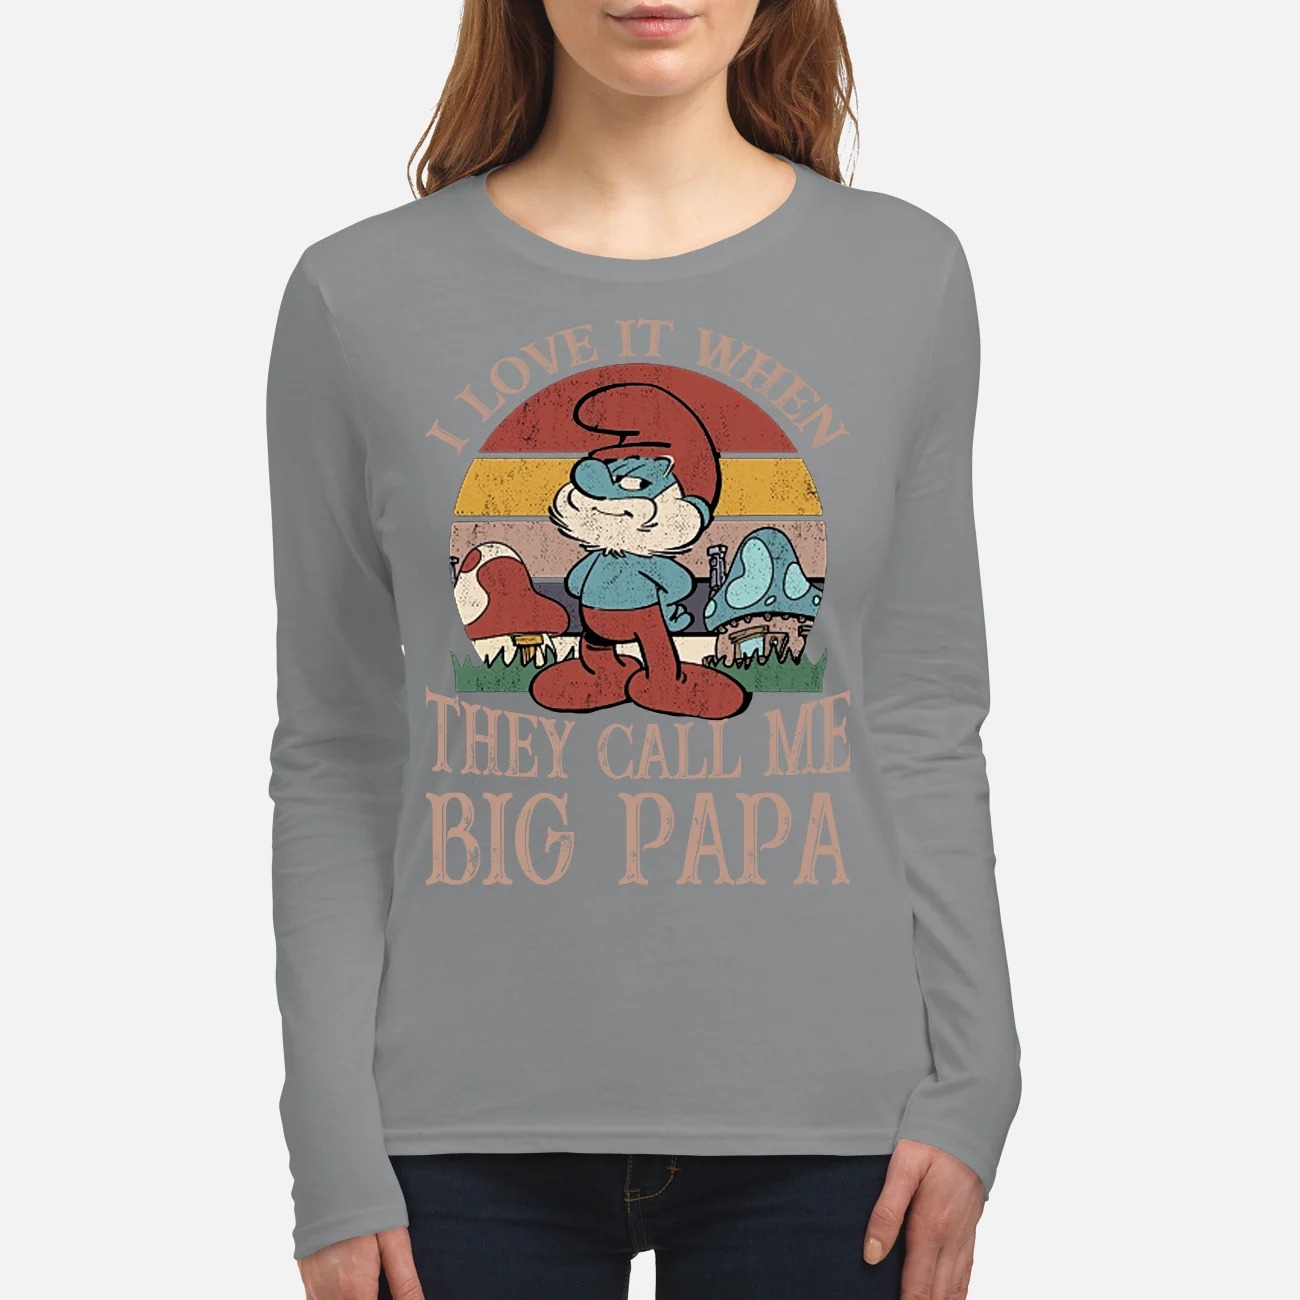 Smurf I love it when they call me big papa women's long sleeved shirt